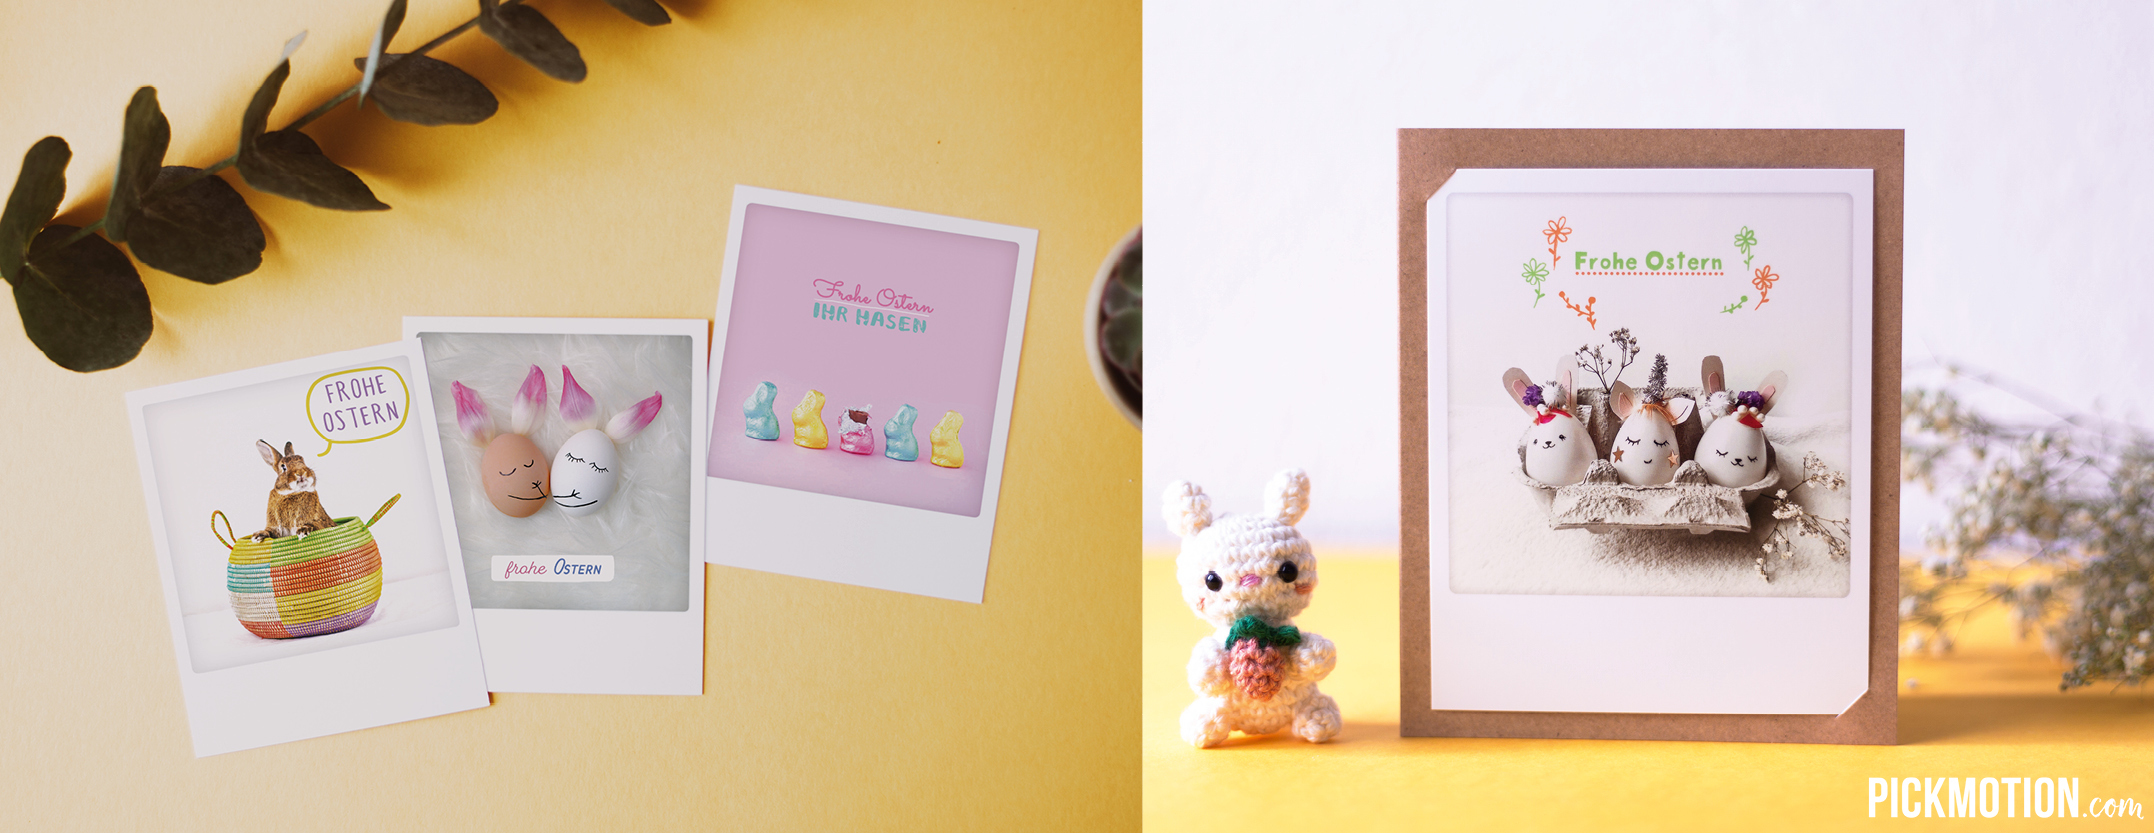 Postcards-of-the-Month-Ostern_4